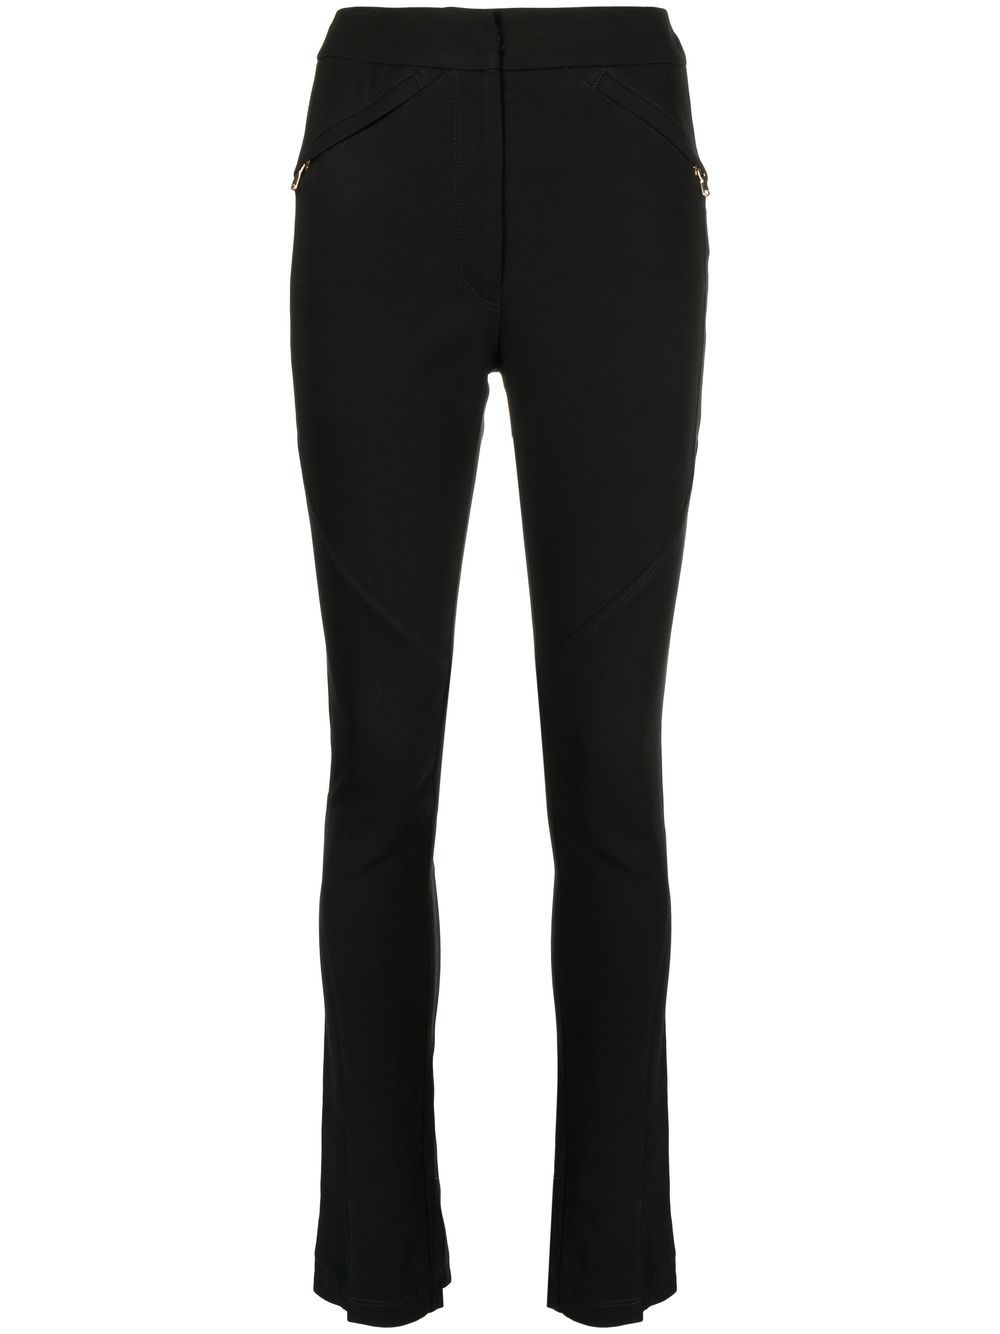 MANNING CARTELL slim-cut front-slit Trousers - Farfetch